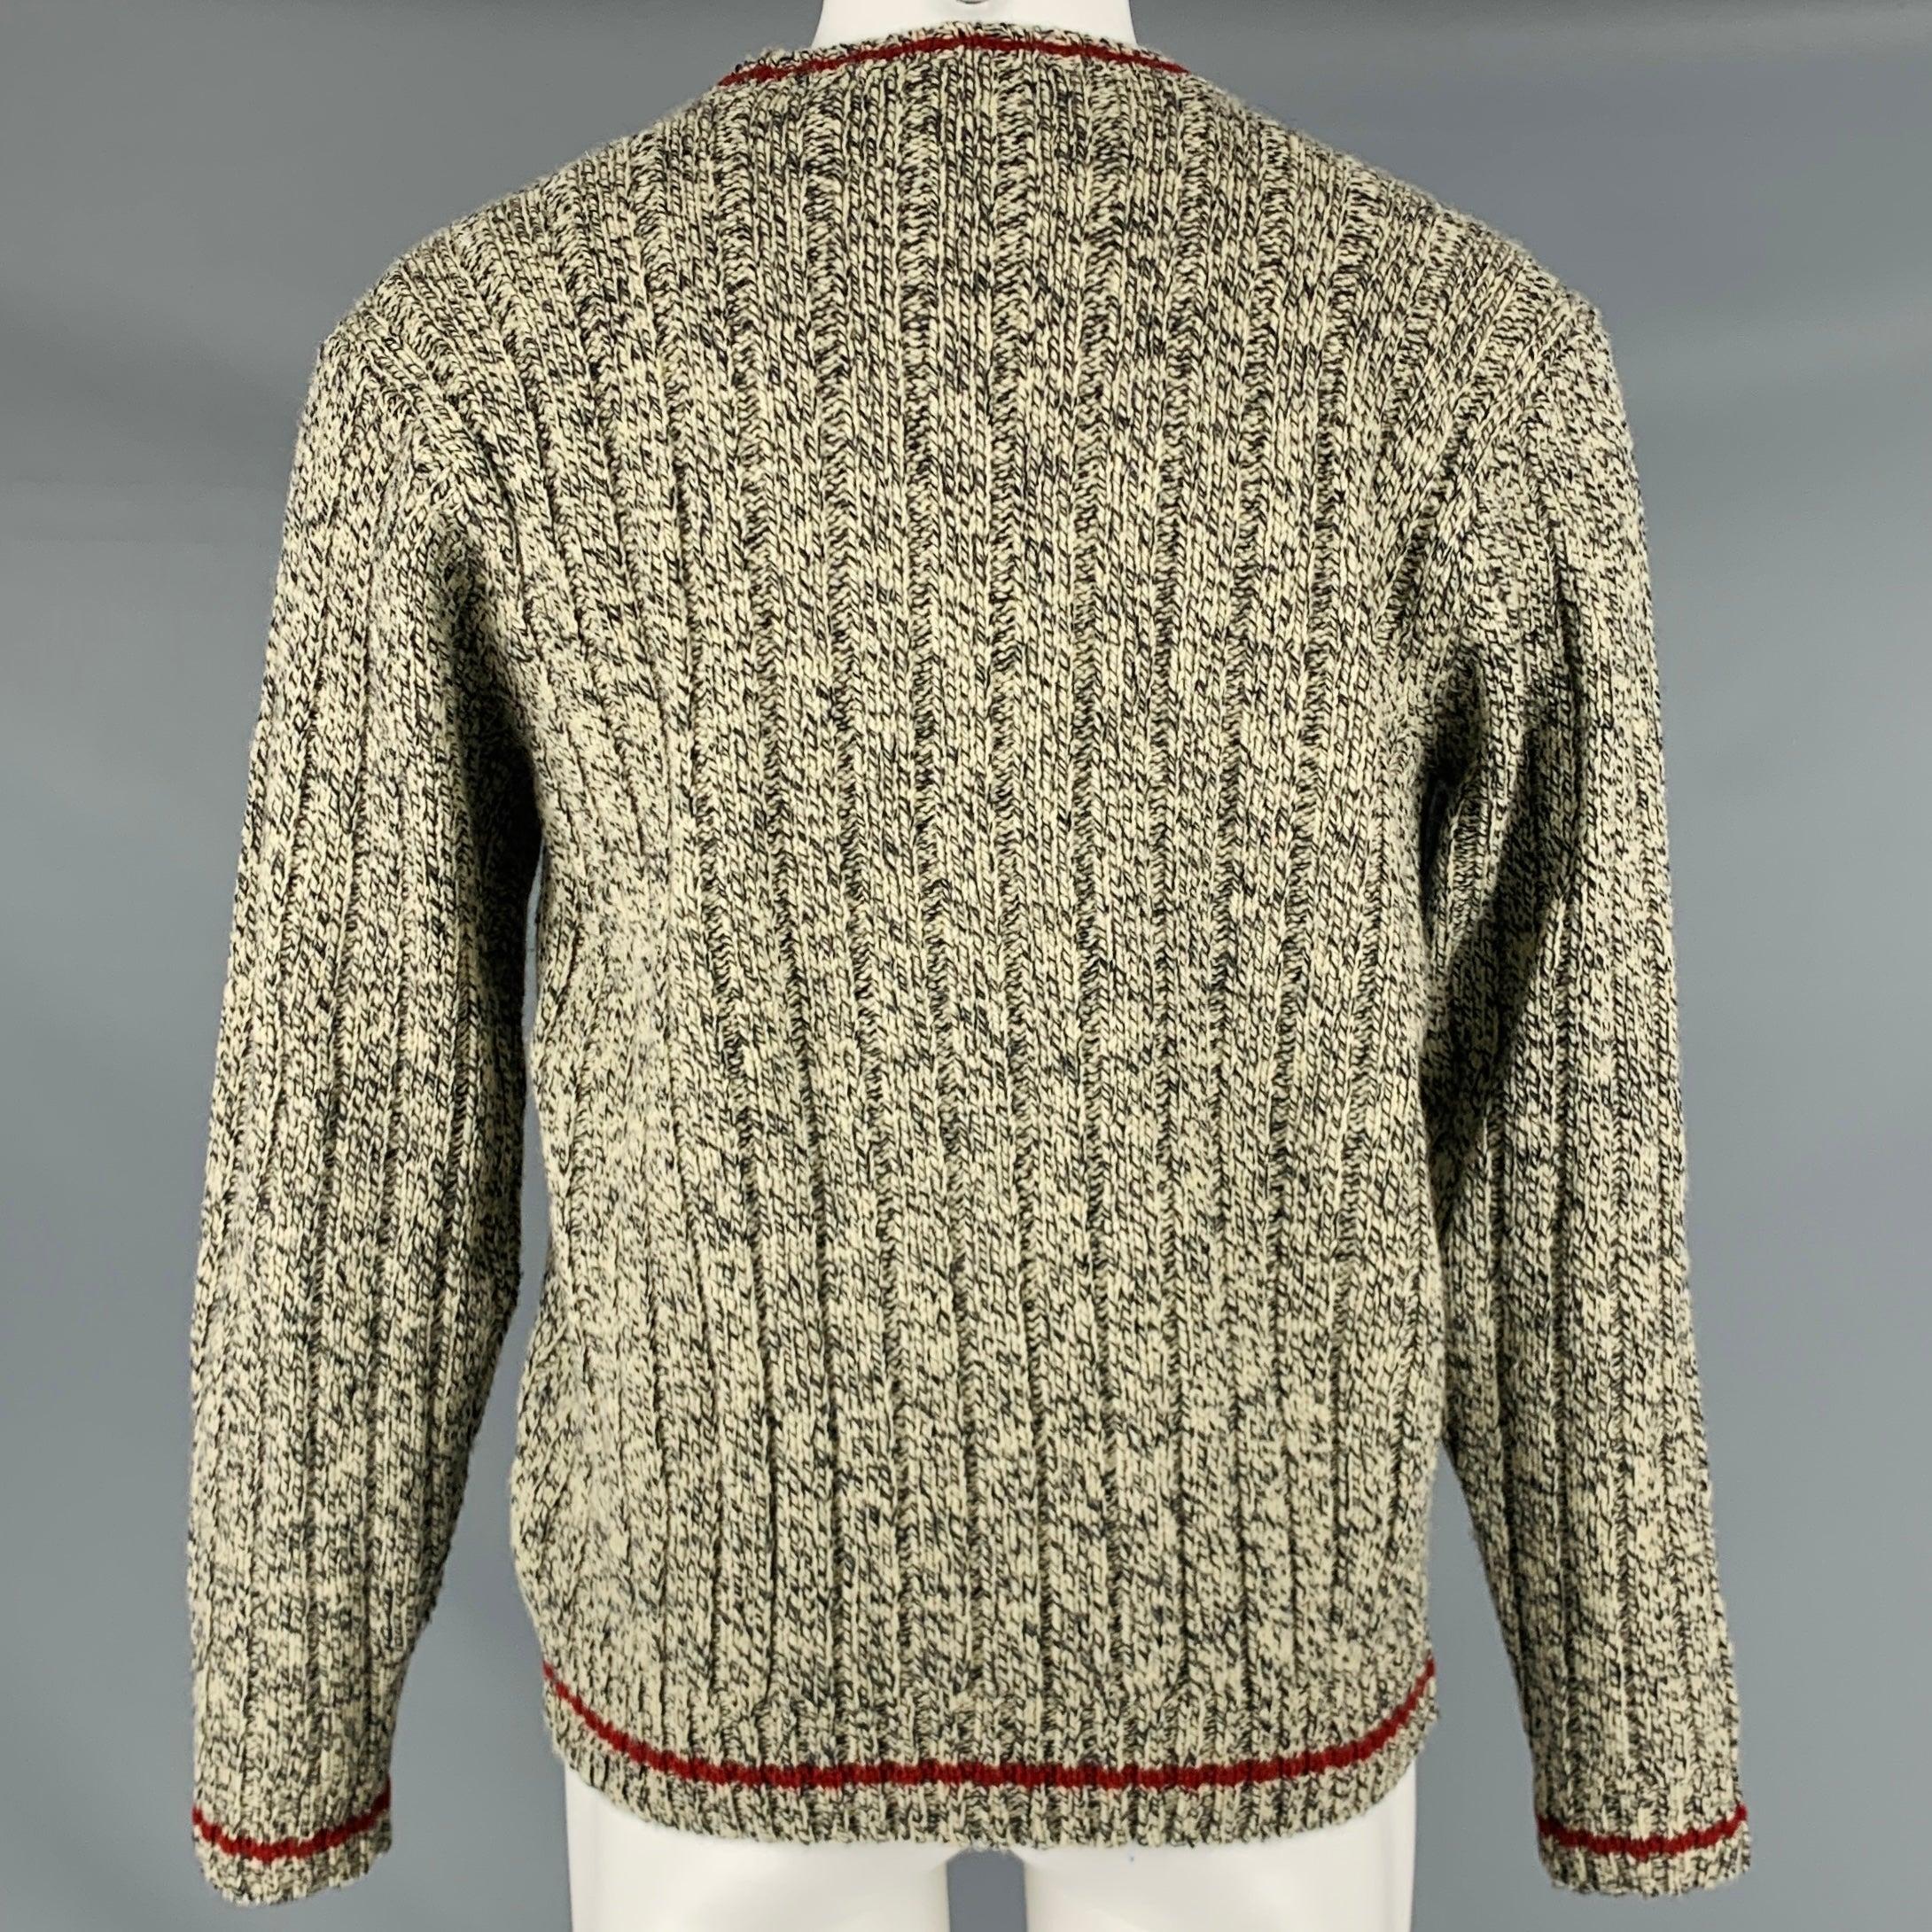 RALPH LAUREN Size M Beige Black Knitted Wool Nylon Crew Neck Sweater In Excellent Condition For Sale In San Francisco, CA